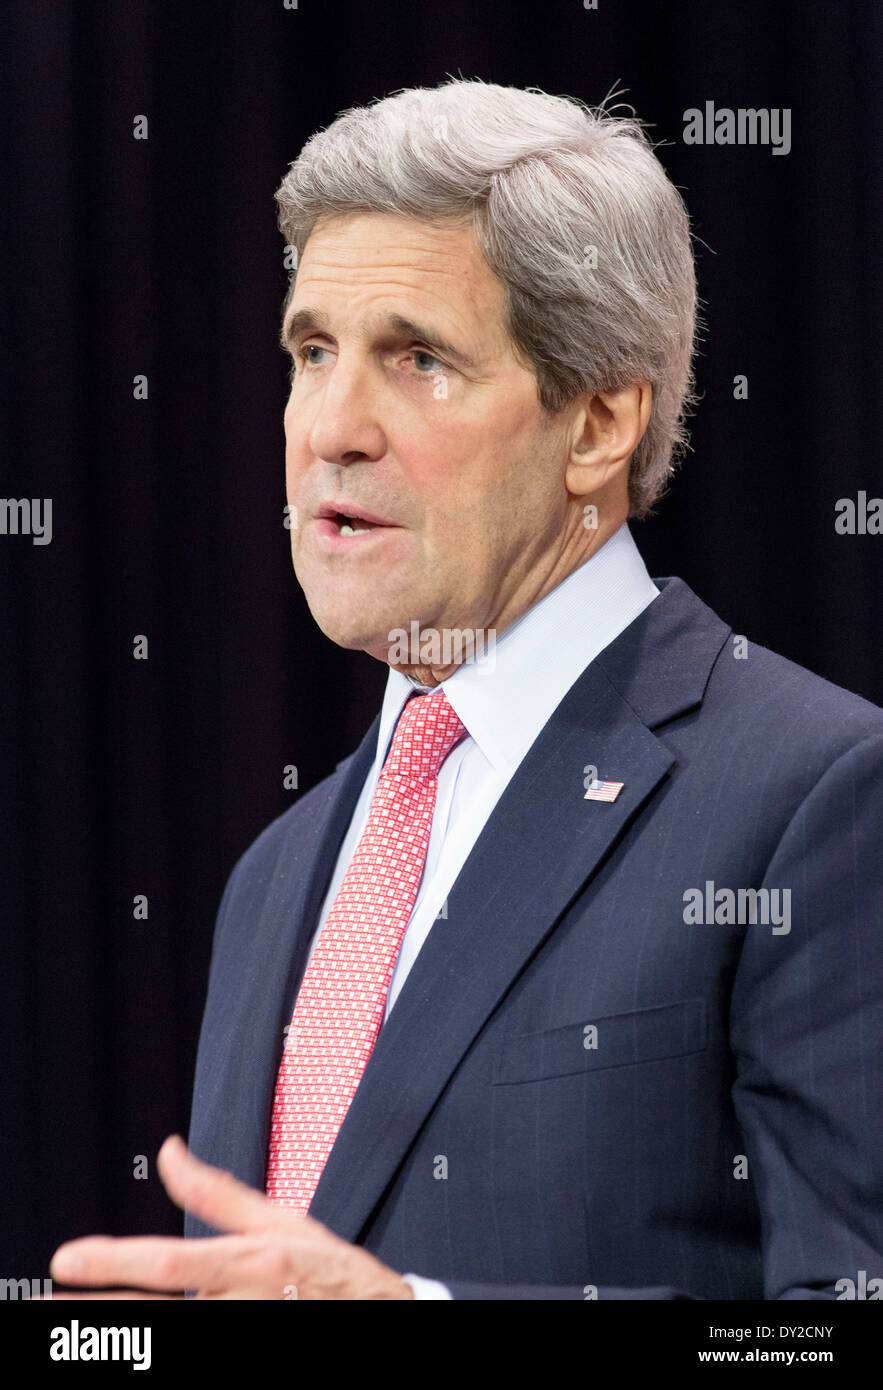 Brussels, John Kerry attending the Meetings of NATO Ministers of Foreign Affairs on 2013/04/23 Stock Photo